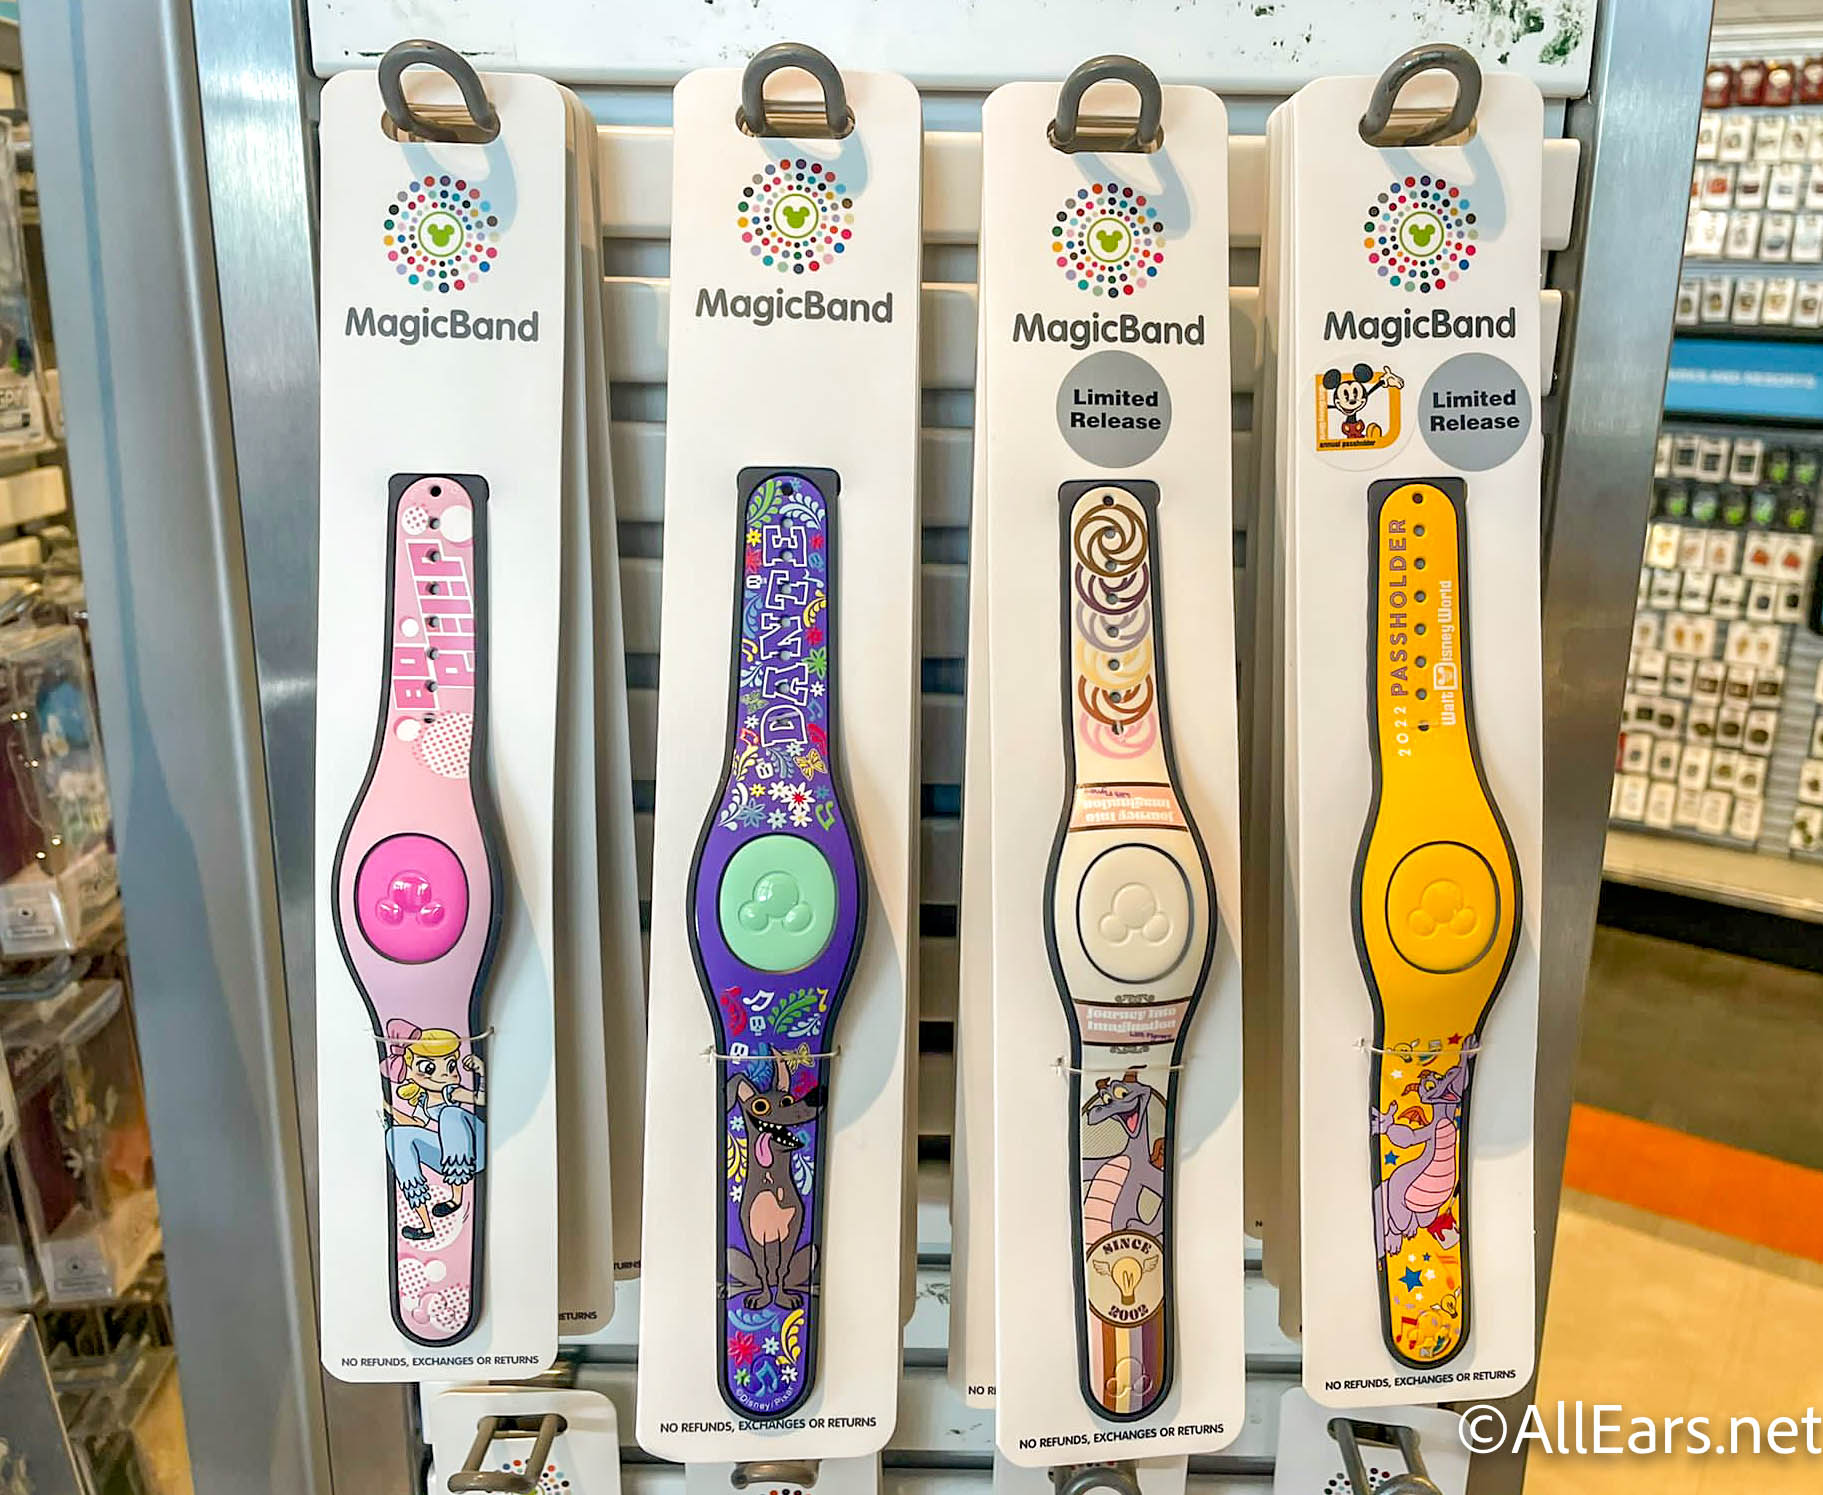 https://allears.net/wp-content/uploads/2022/06/2022-wdw-epcot-pin-traders-new-magicbands-figment-coco-dante-toy-story-bo-peep-16.jpg